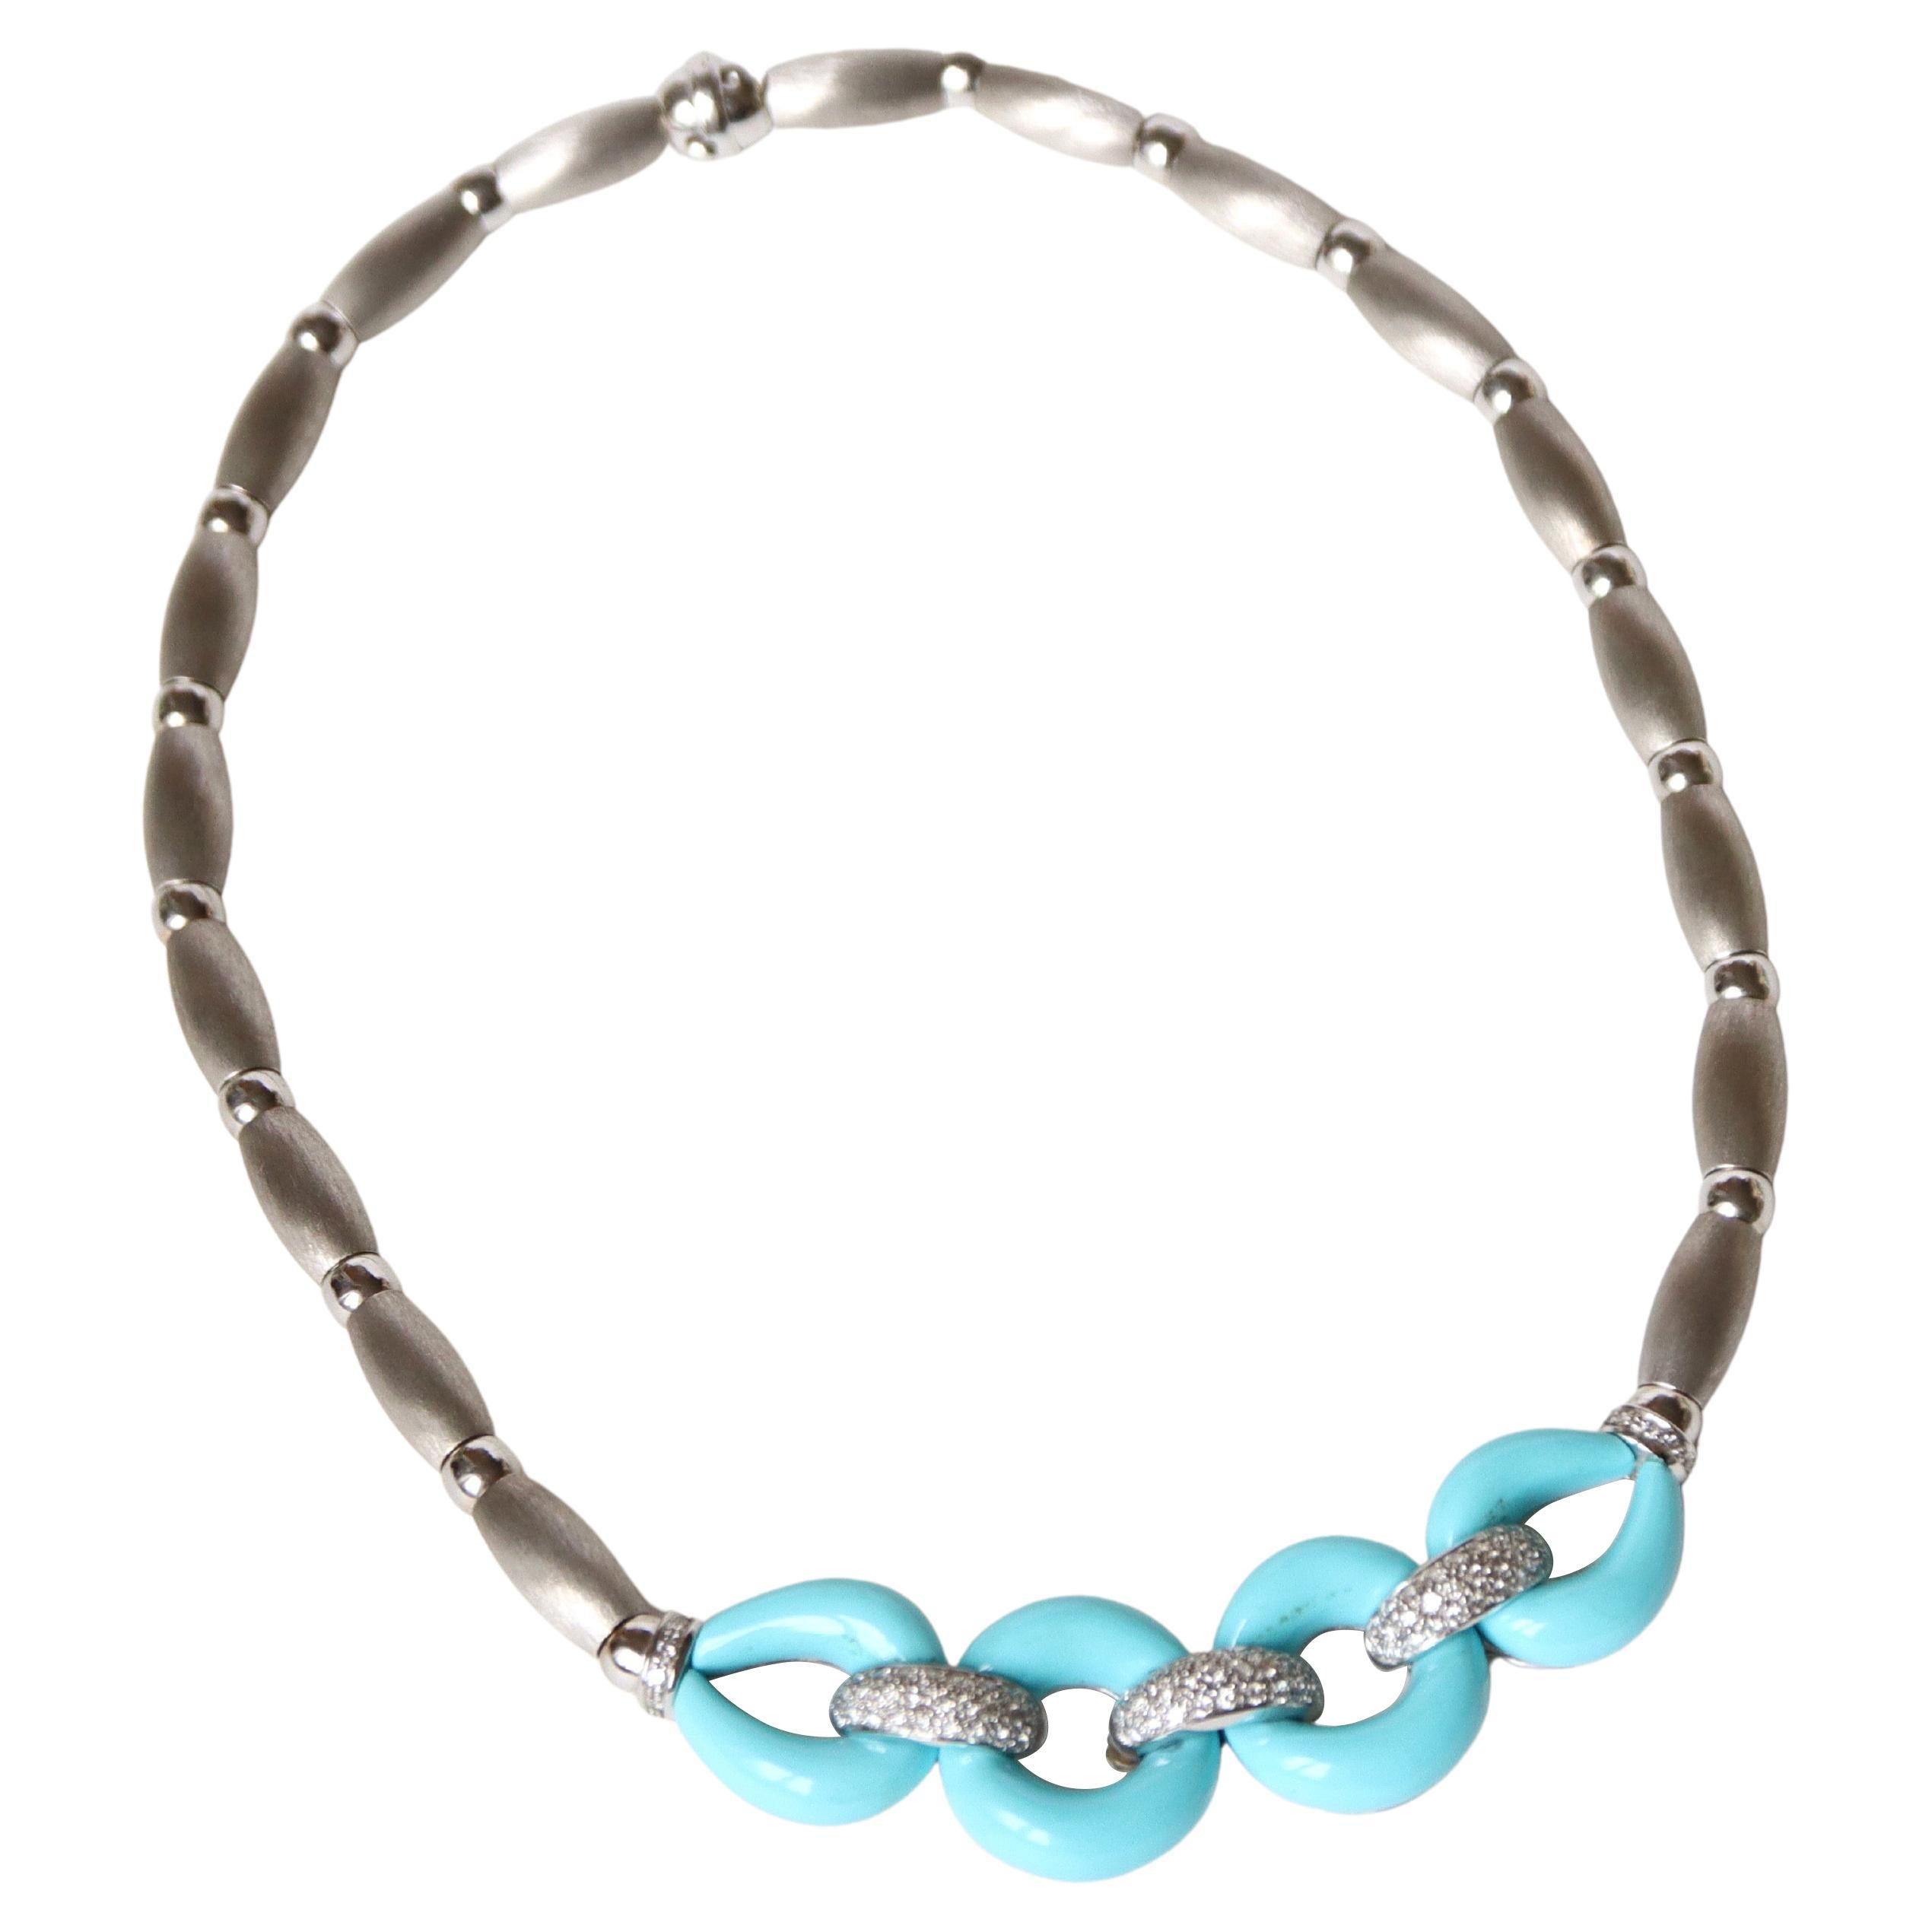 Turquoise and Diamonds Necklace 18 Kt White Gold